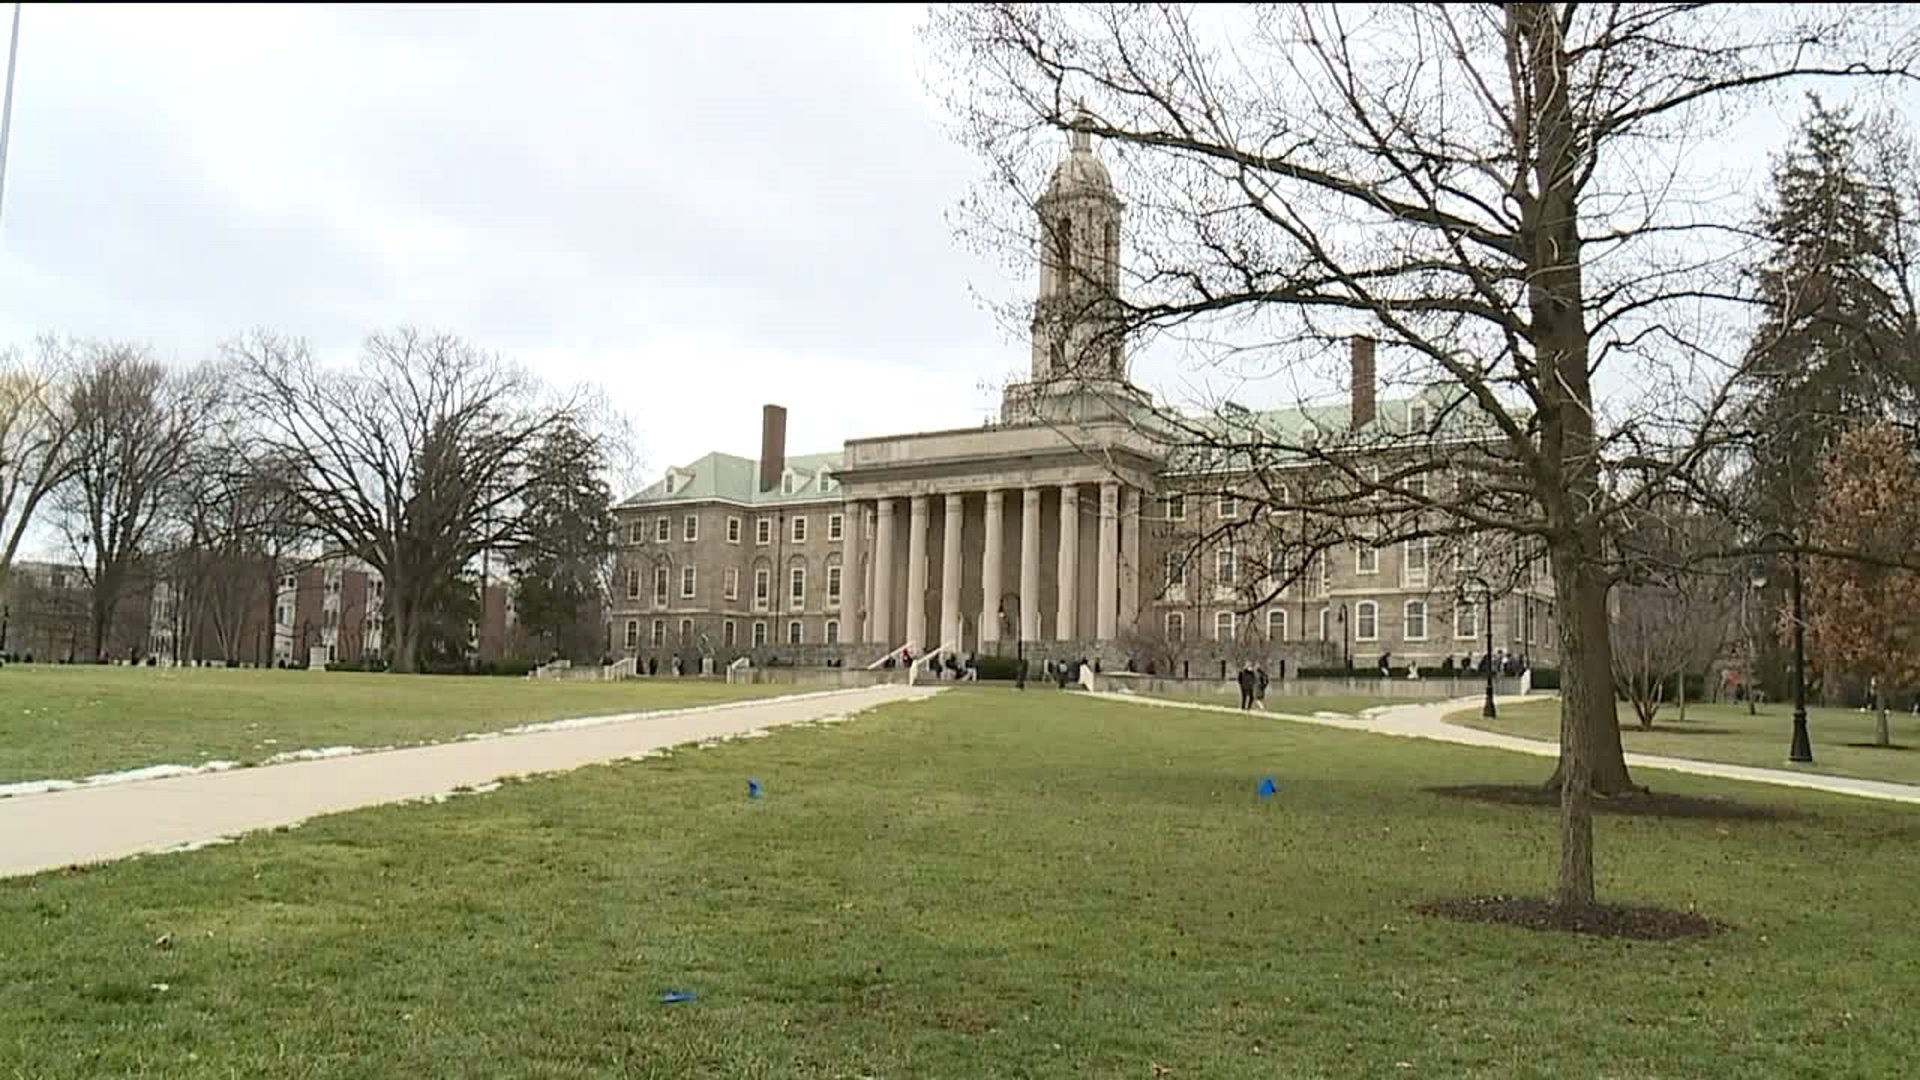 Limited oncampus classes to resume this fall at PSU